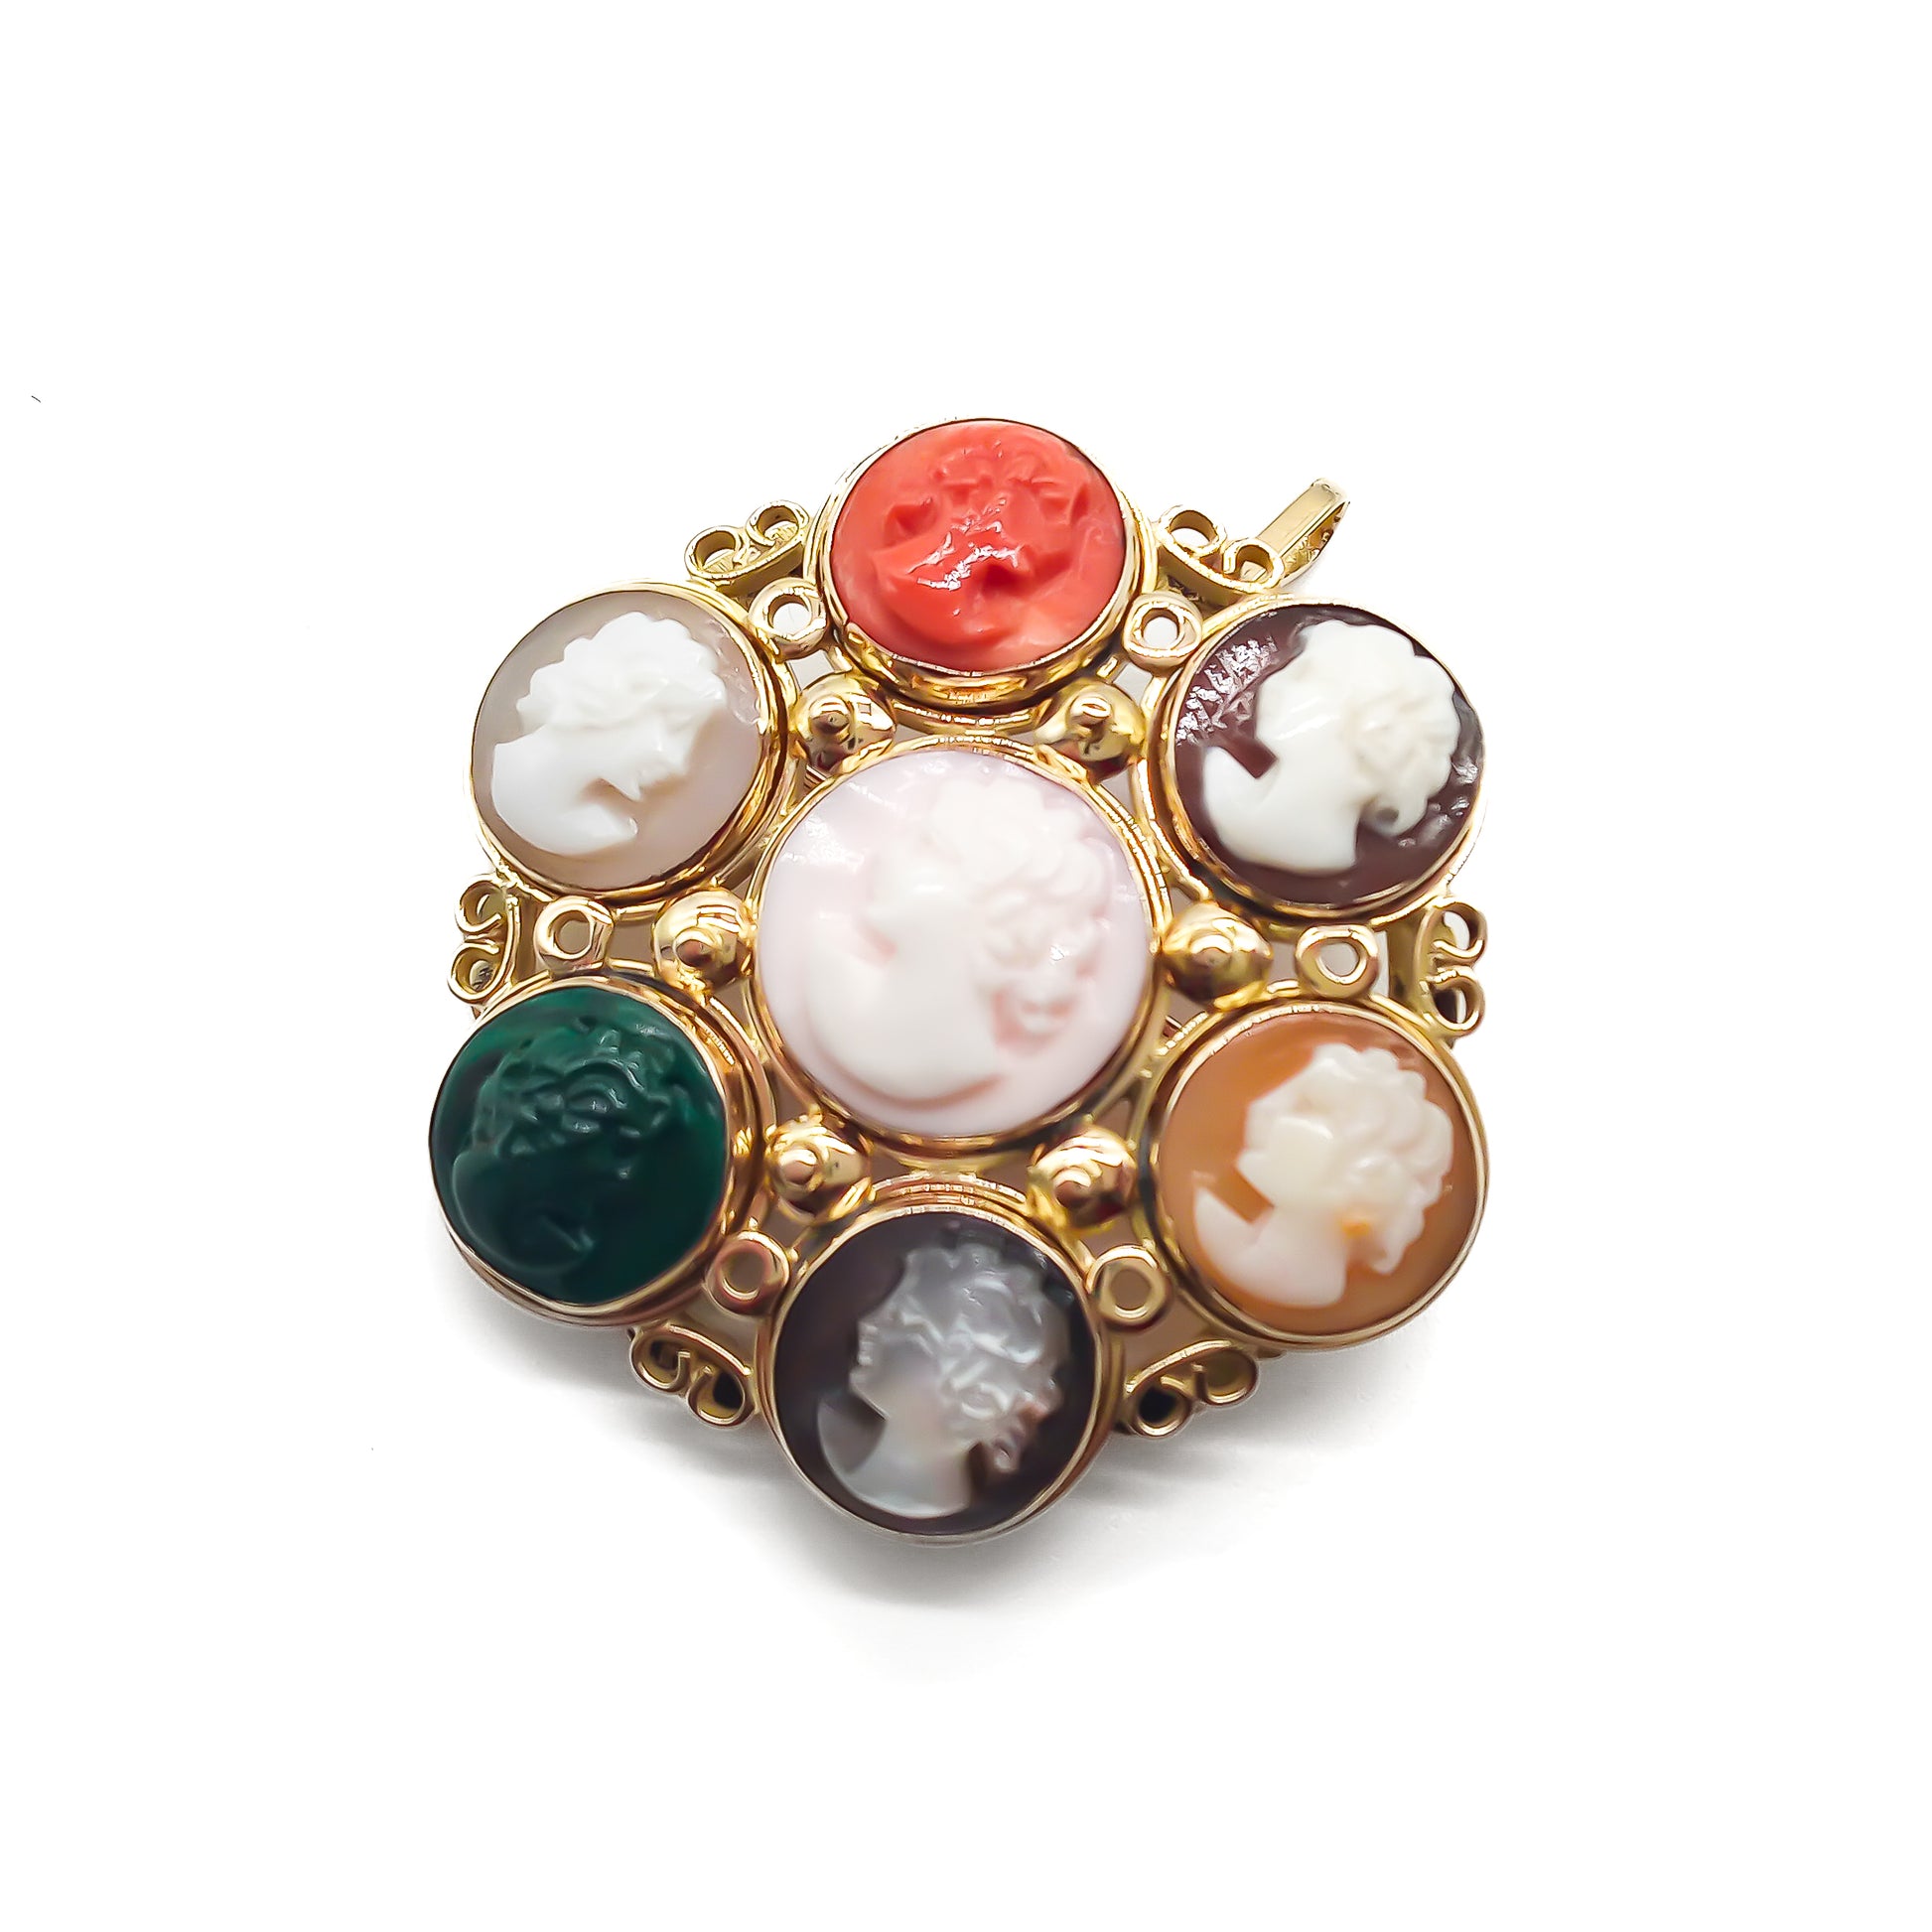 Unique 14ct yellow gold pendant/brooch set with a variety of seven small cameos, including one coral and one chrysoprase. Beautiful scroll work on setting.